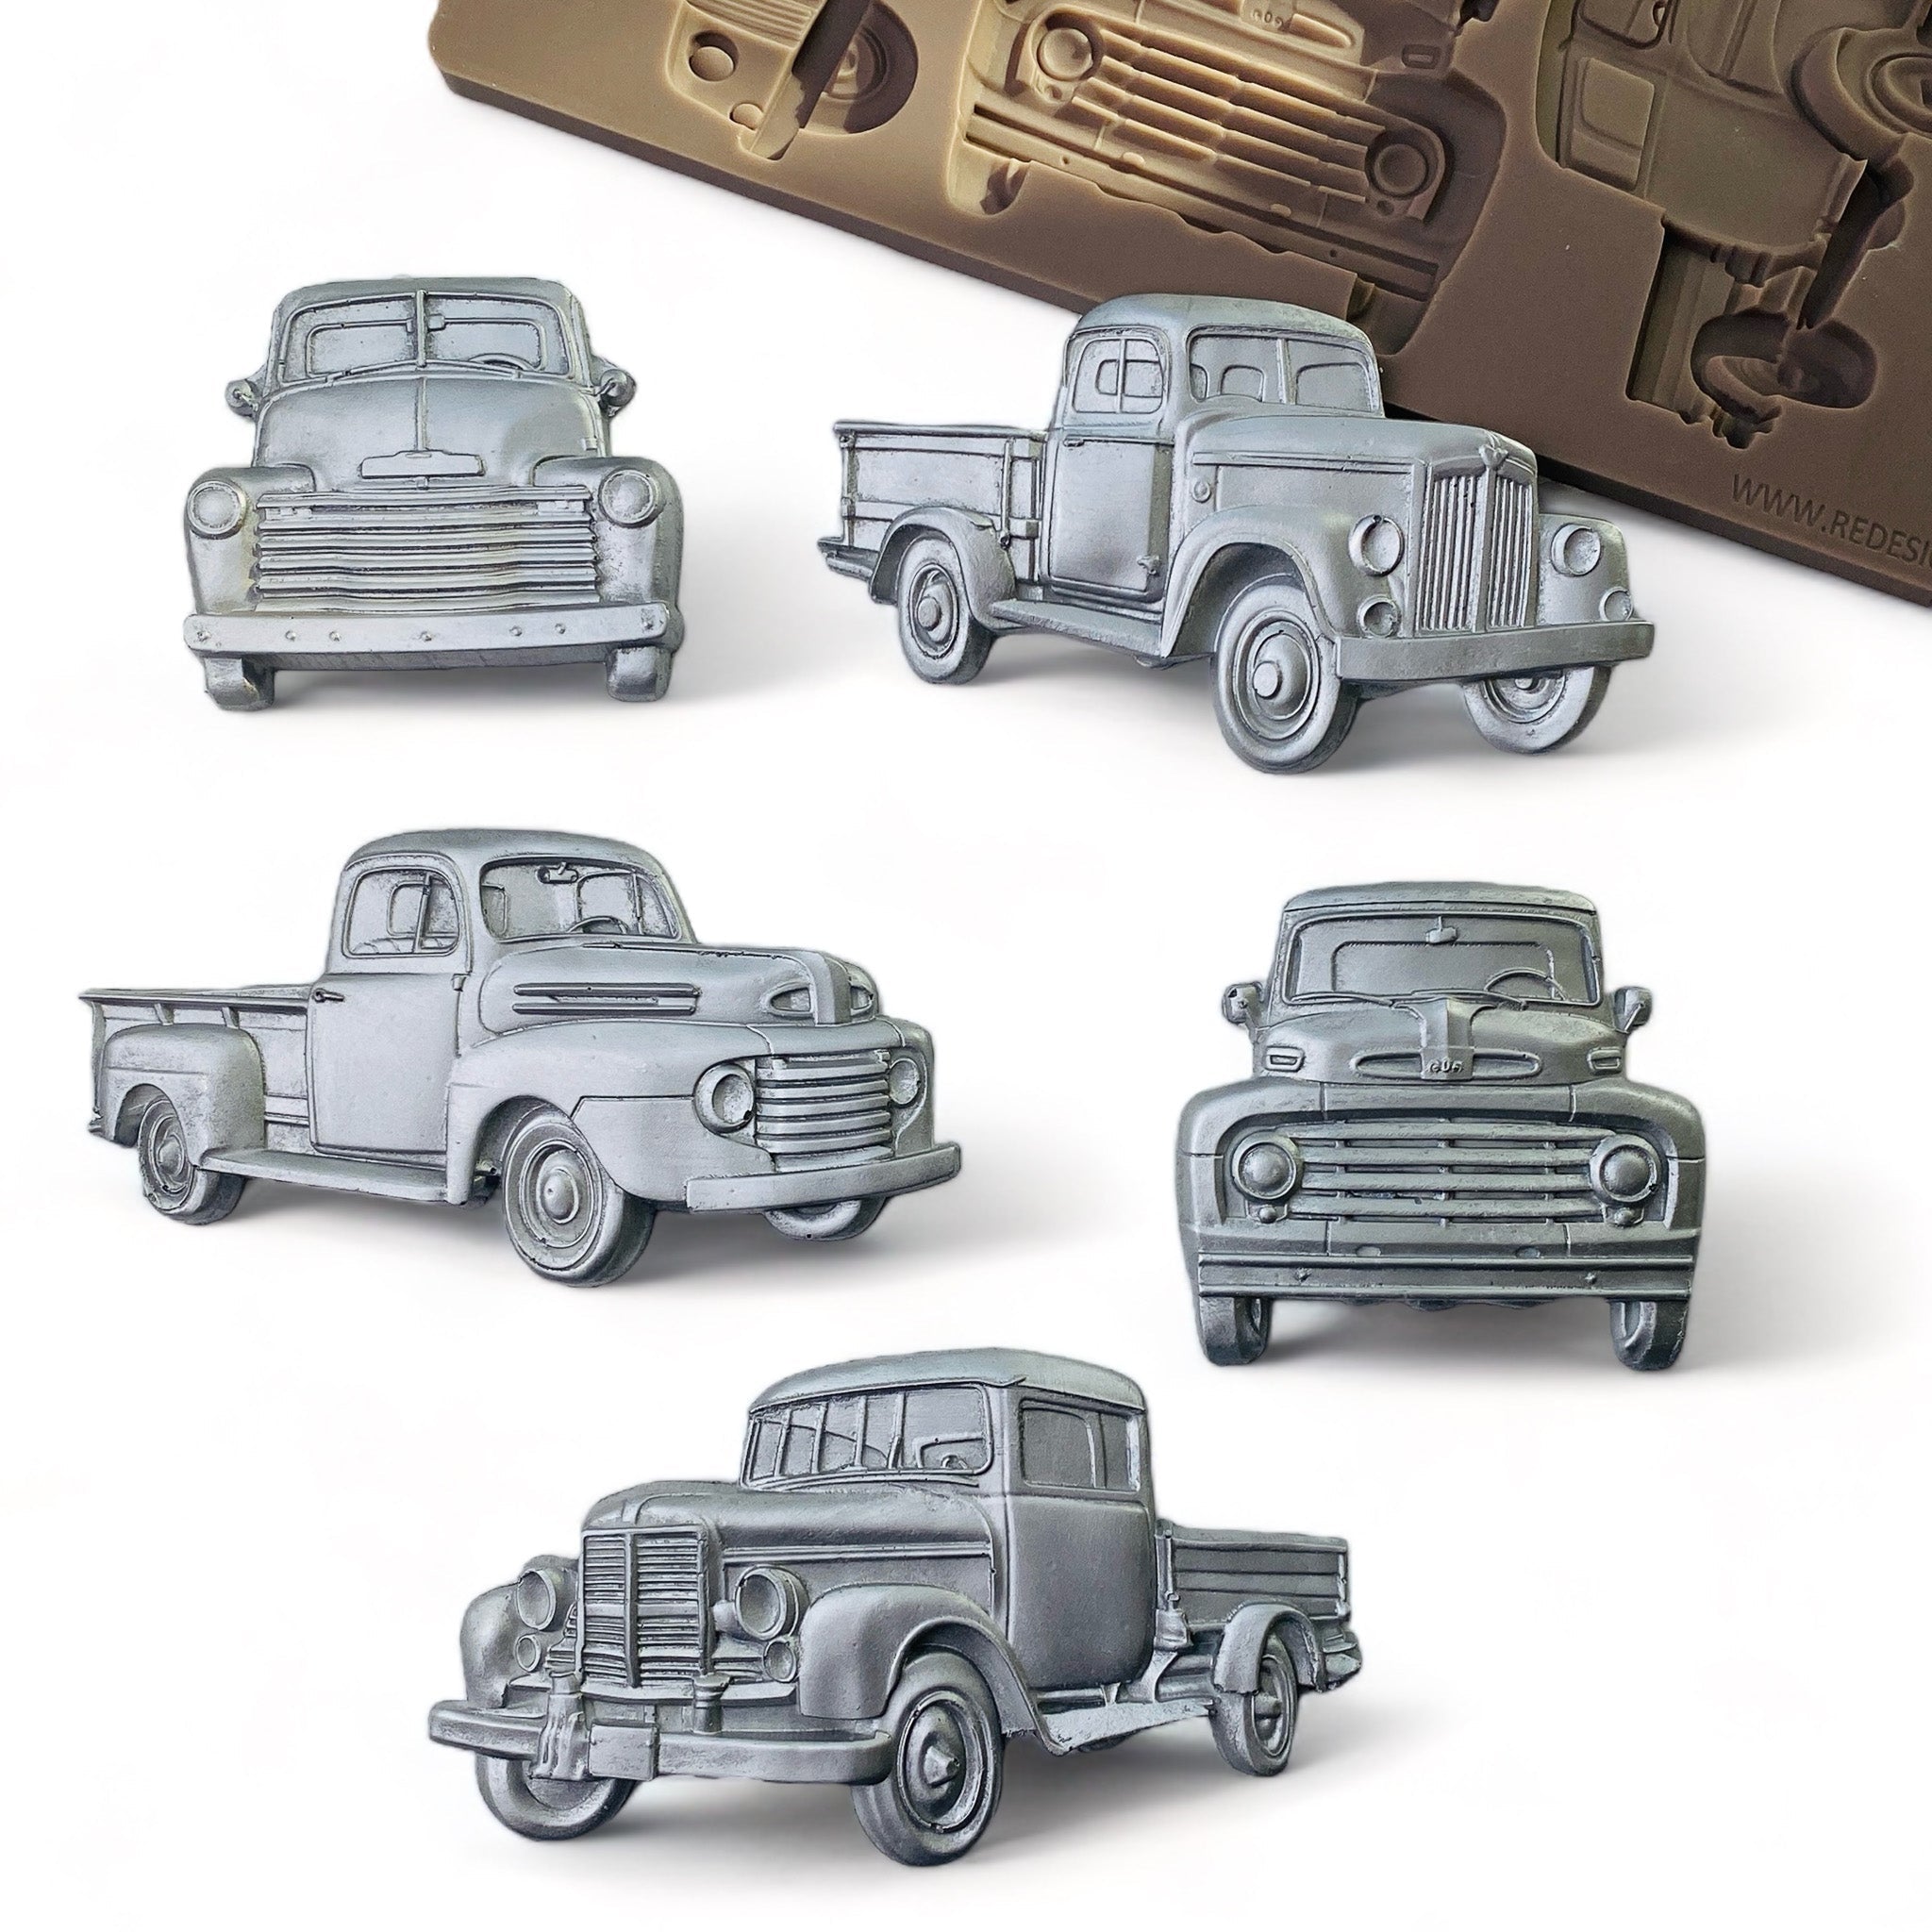 Silver colored silicone mold castings of 5 vintage farm trucks are against a white background.